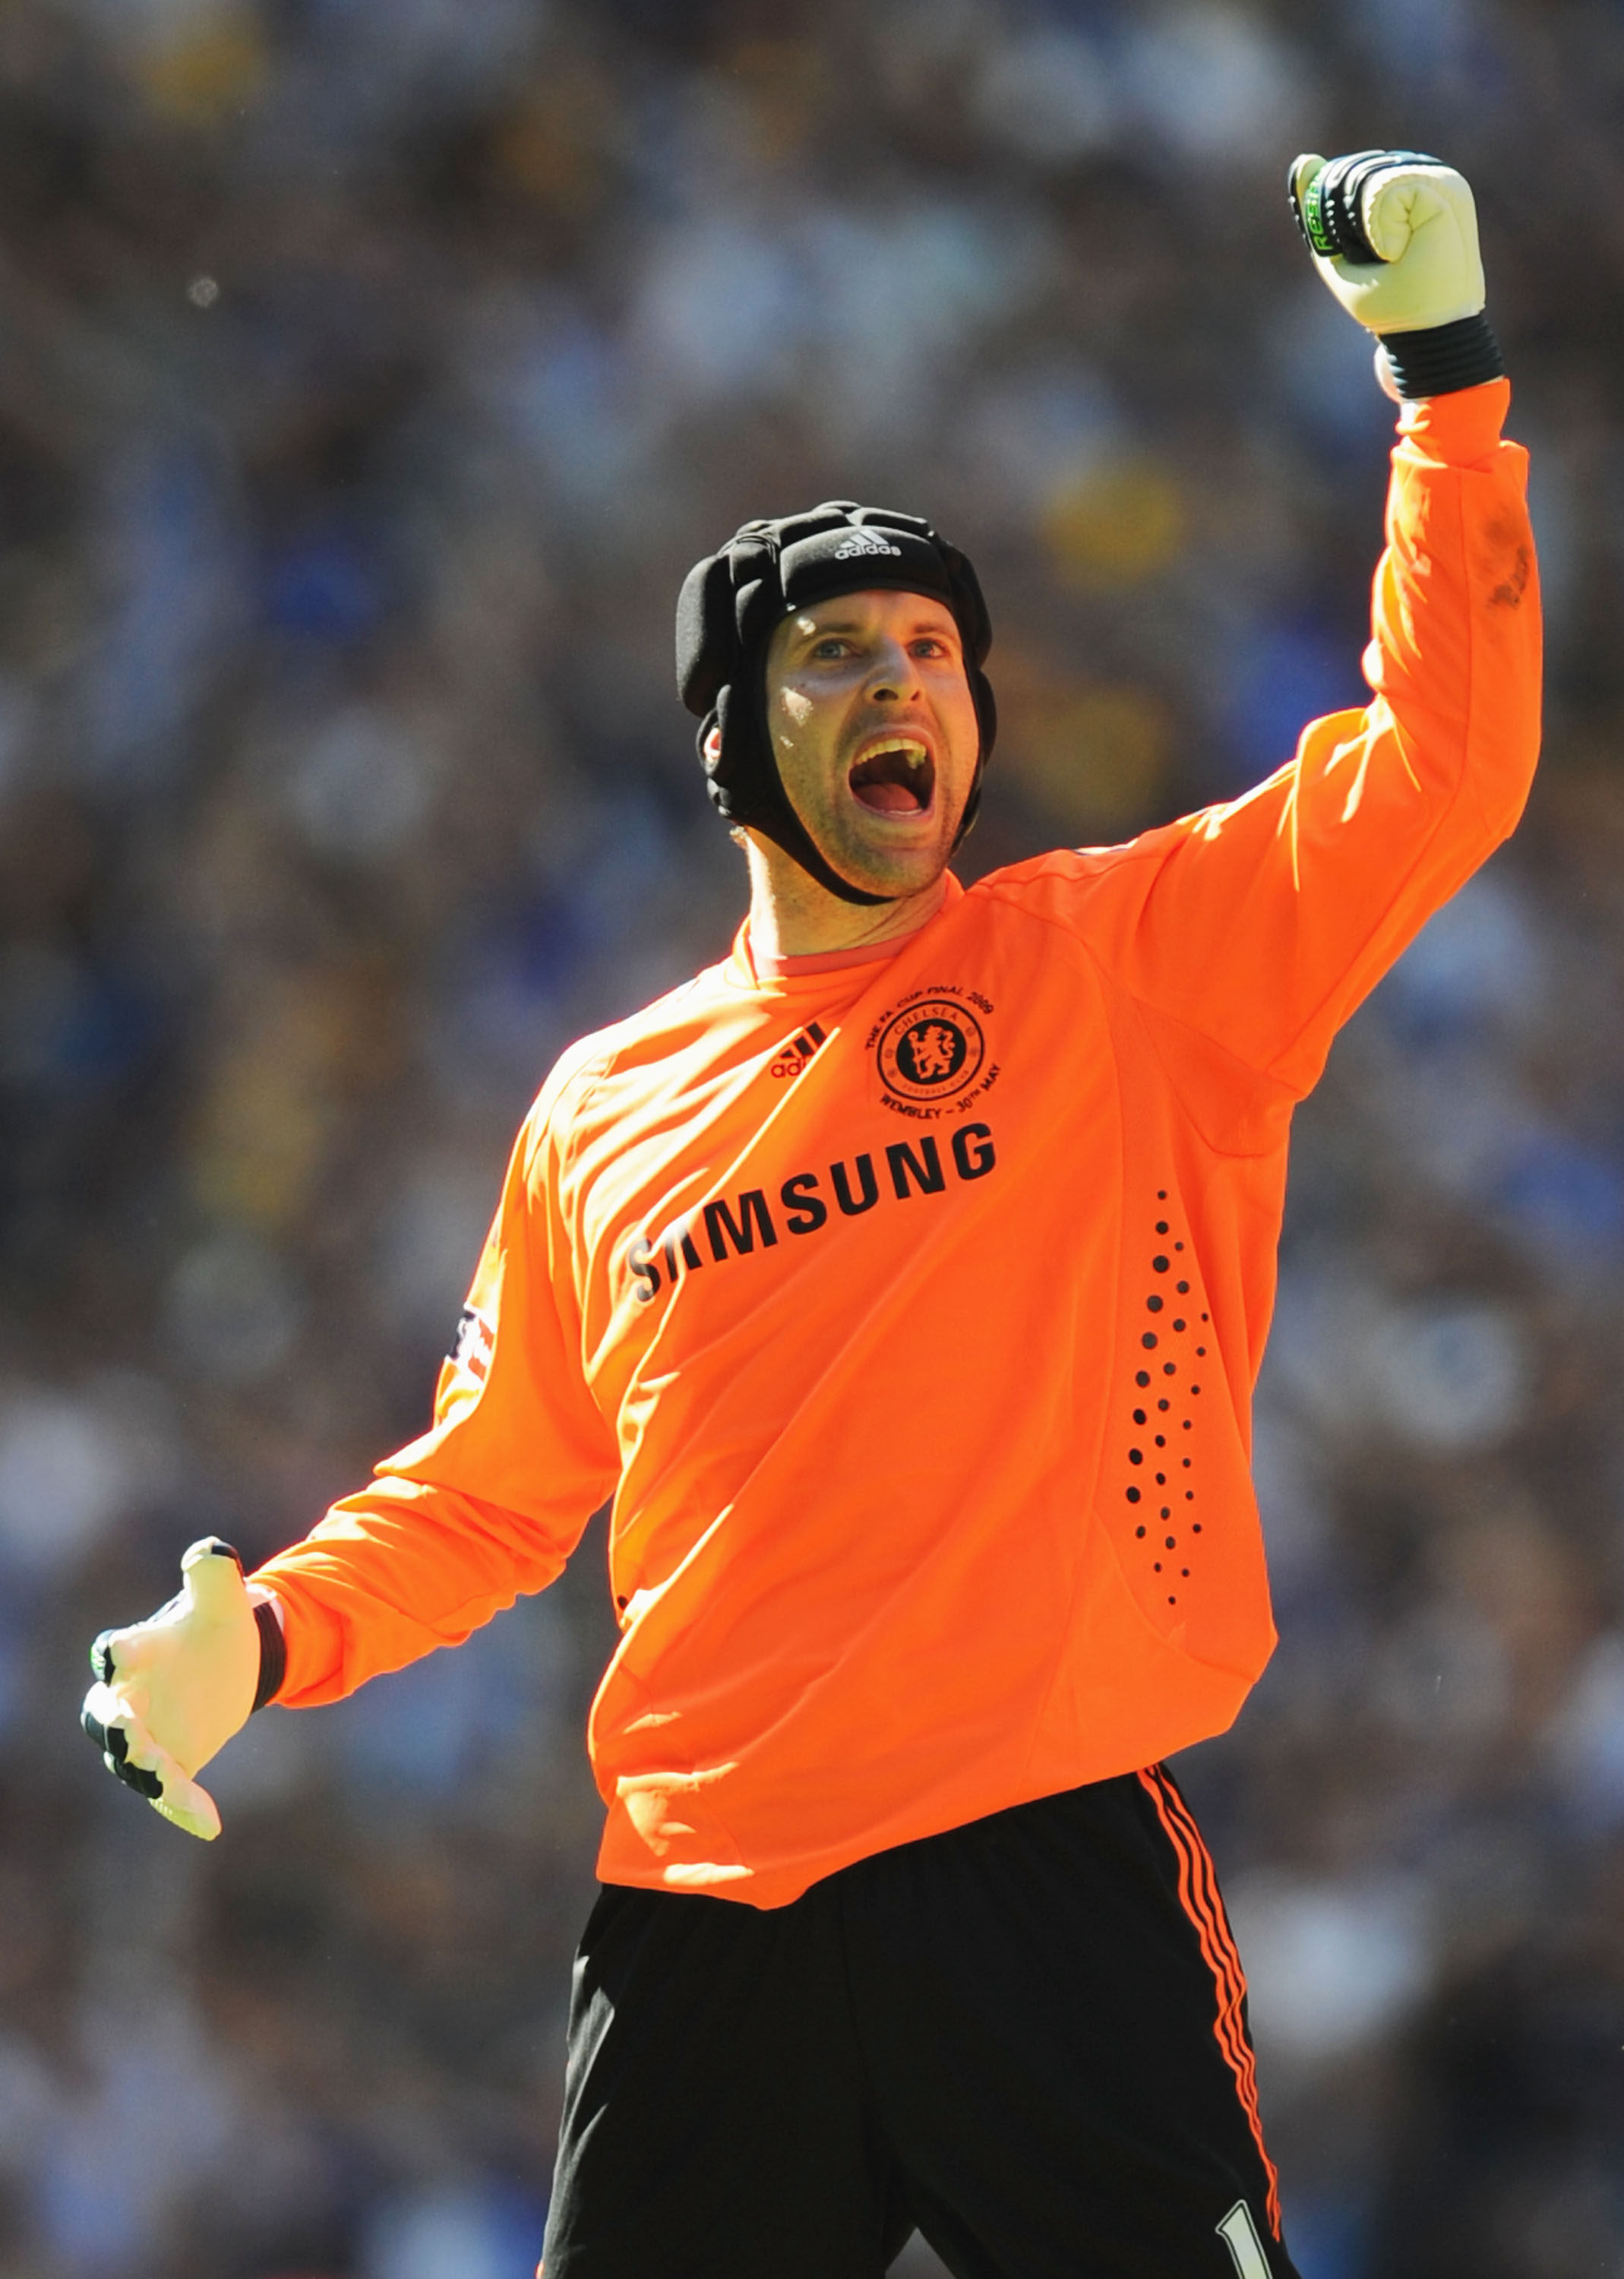 LONDON, ENGLAND - MAY 30:  Petr Cech of Chelsea celebrates victory following the FA Cup sponsored by E.ON Final match between Chelsea and Everton at Wembley Stadium on May 30, 2009 in London, England.  (Photo by Shaun Botterill/Getty Images)